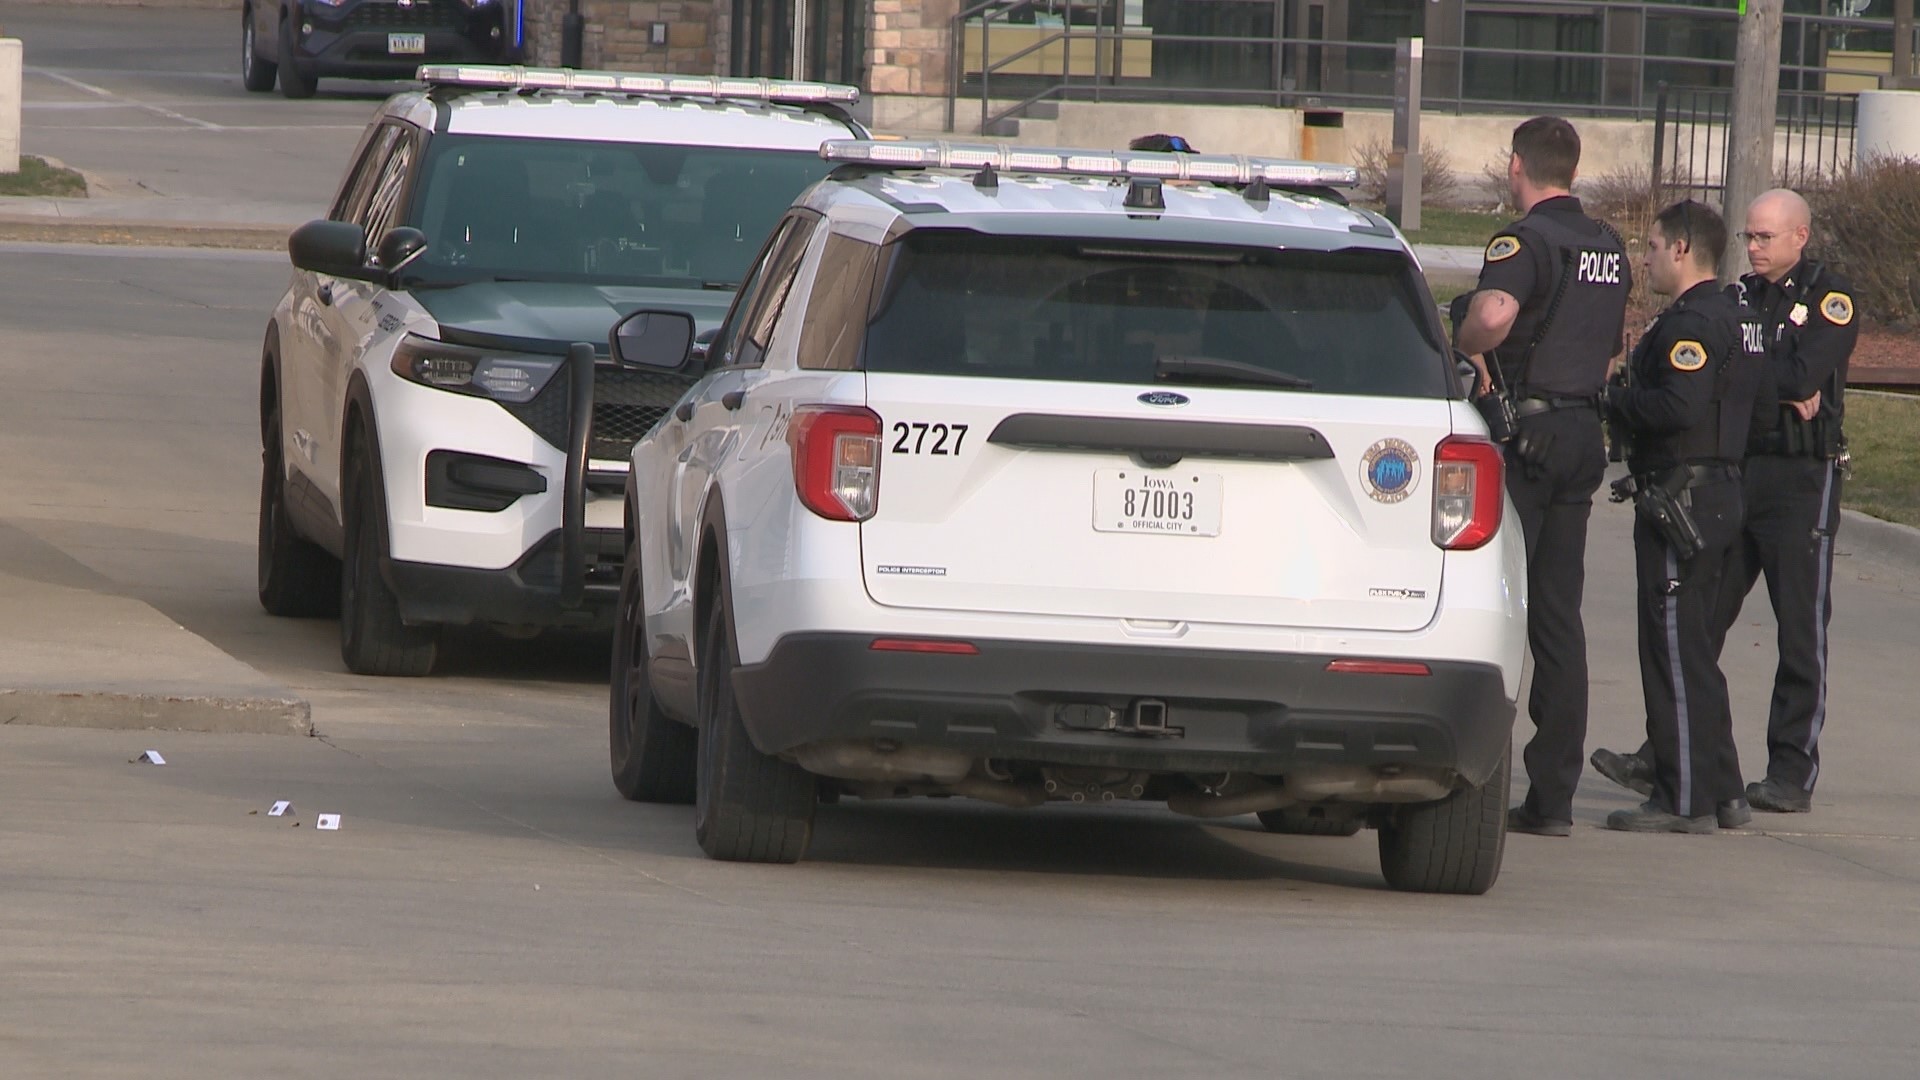 Police say "multiple juveniles" were involved in the shooting, which happened near a Des Moines mall around 5:30 p.m. on March 12.